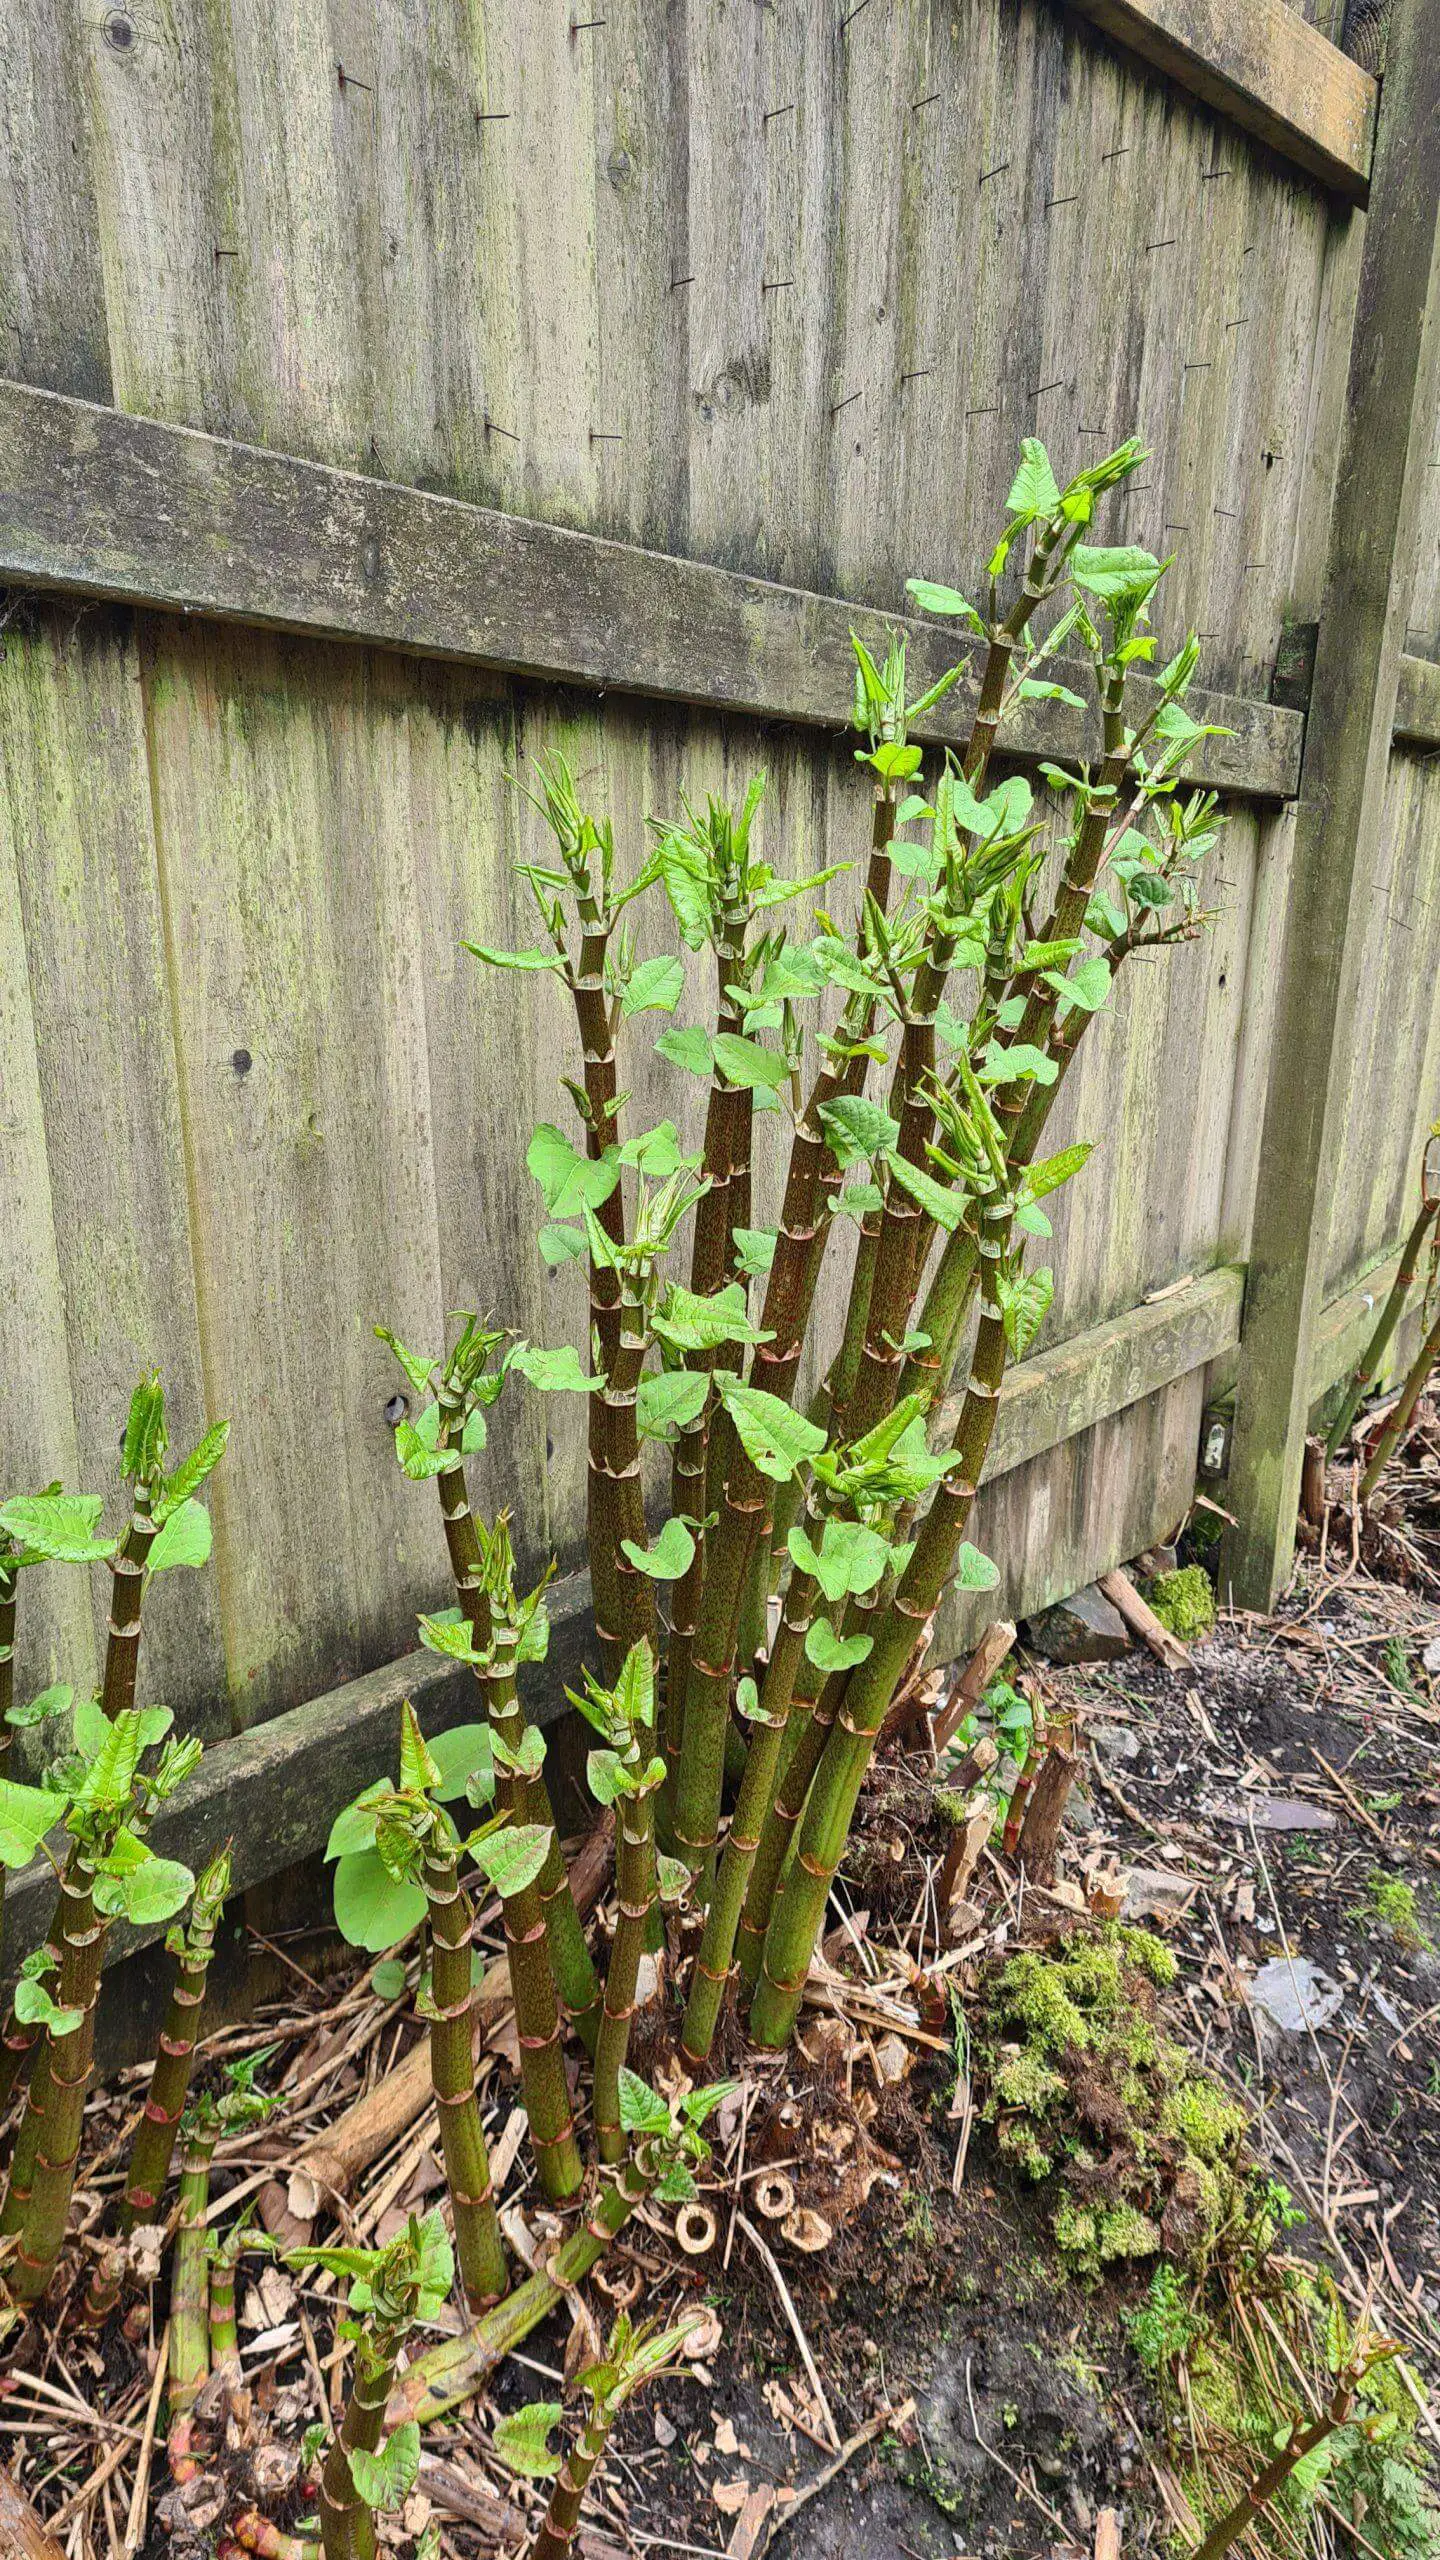 The rapid growth of Japanese knotweed from its crown